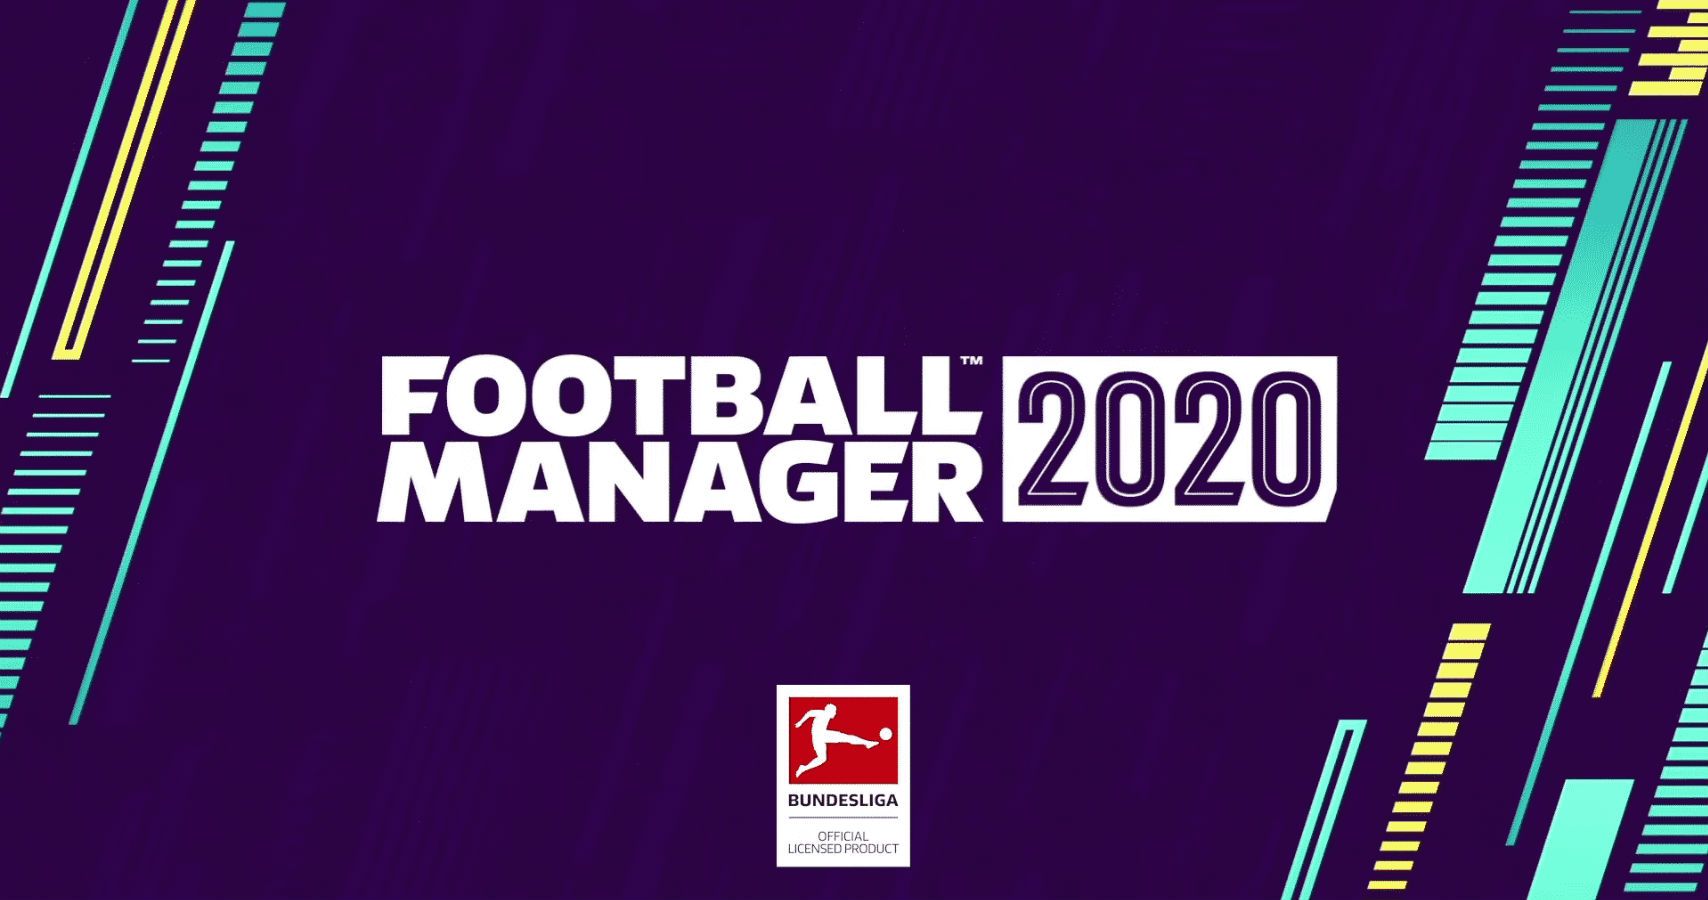 Football Manager 2020 Currently Free To Play (But Its Really Just Soccer)